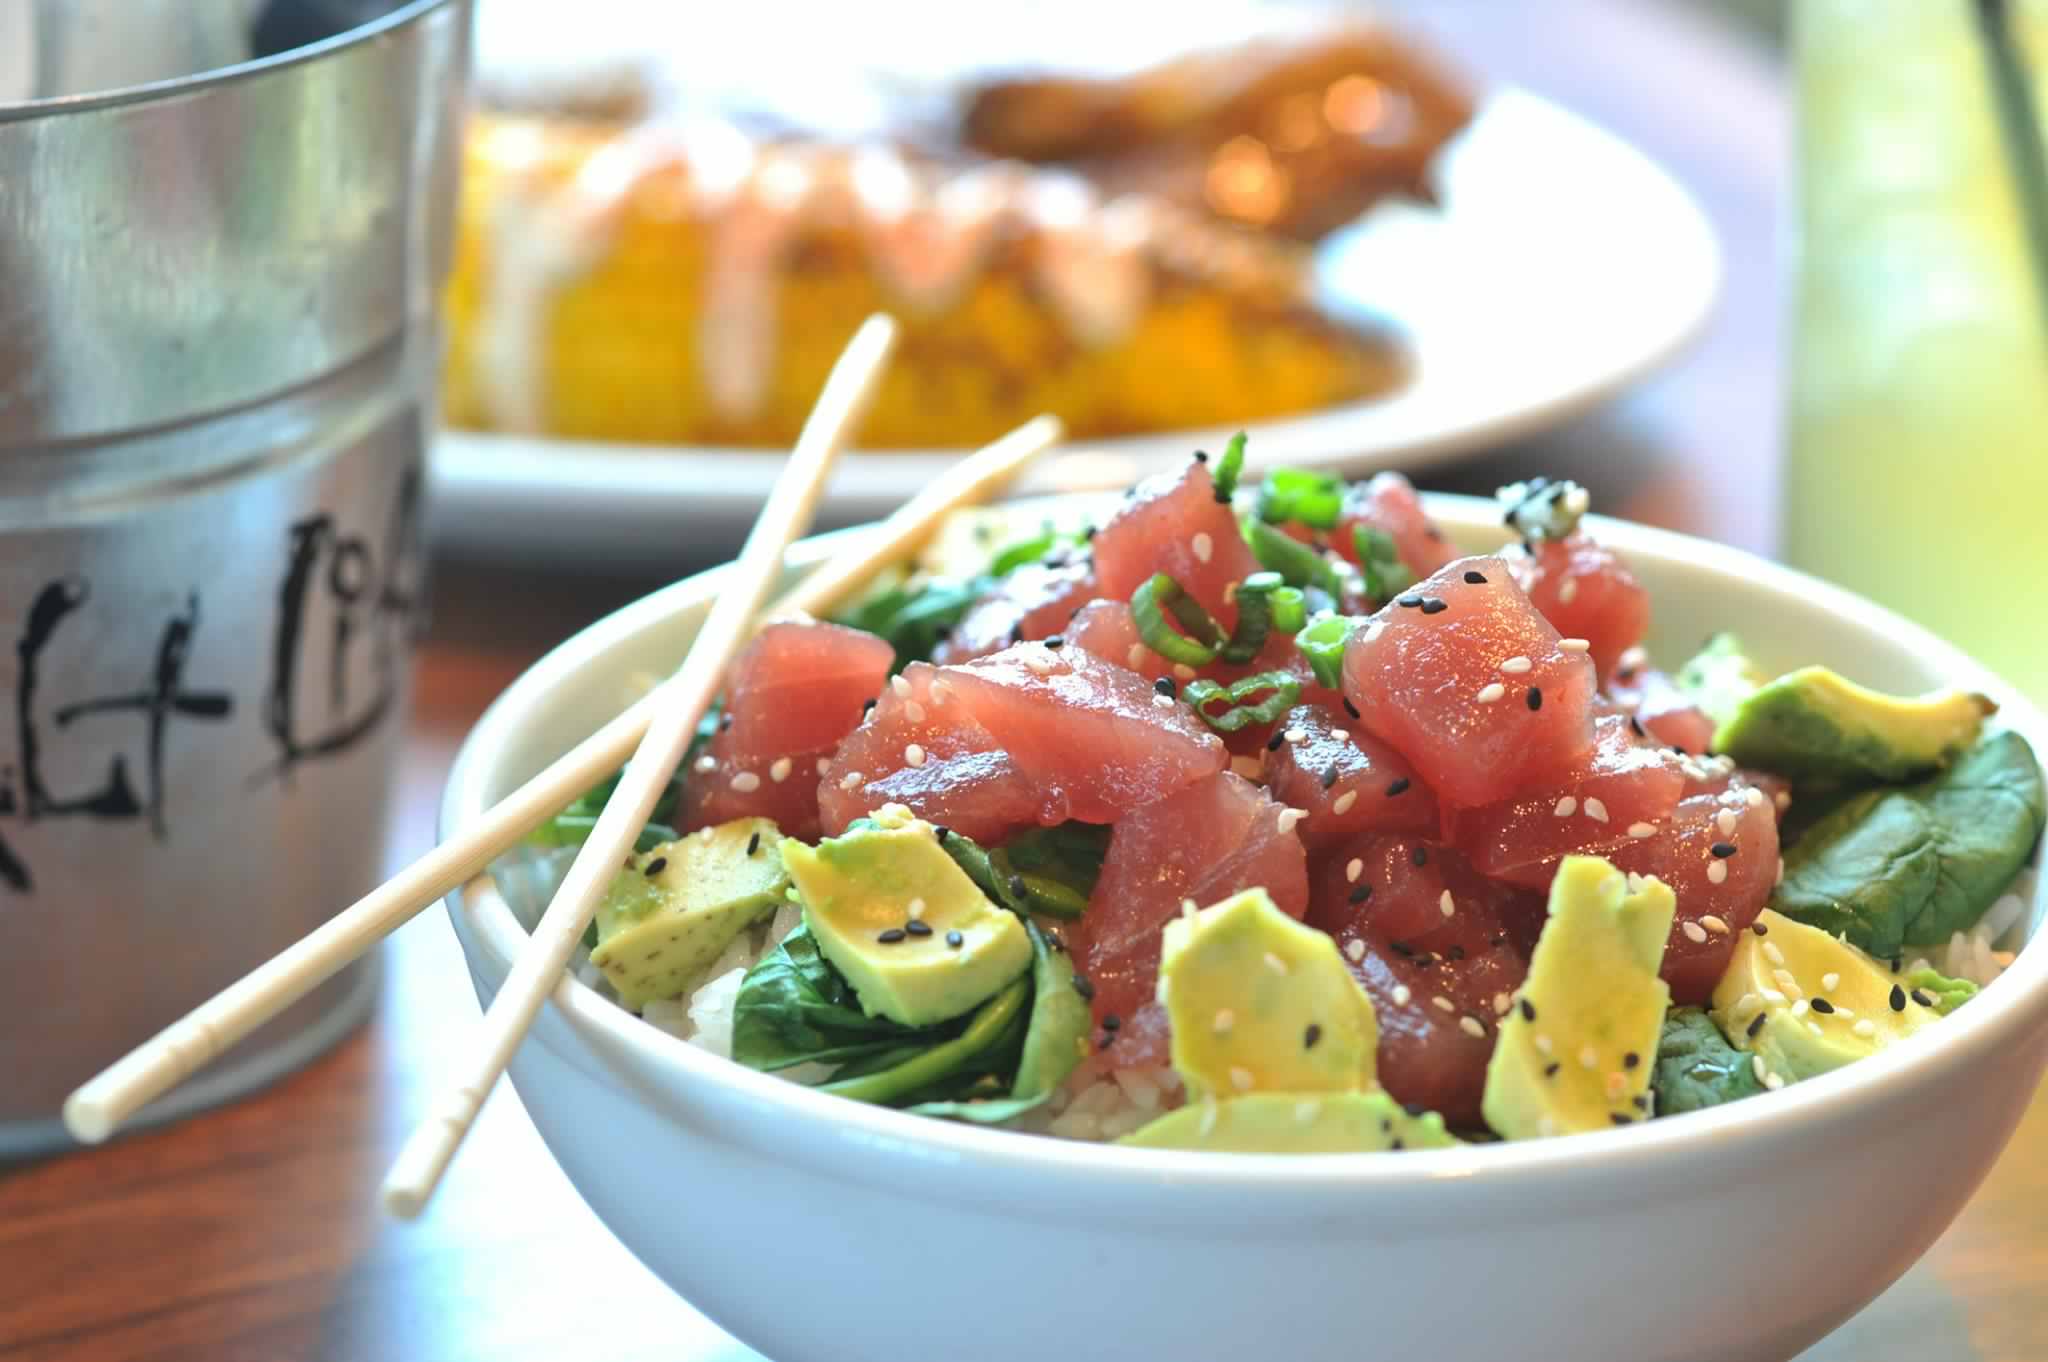 Ceviche and poke bowls in Amoreiras are already open